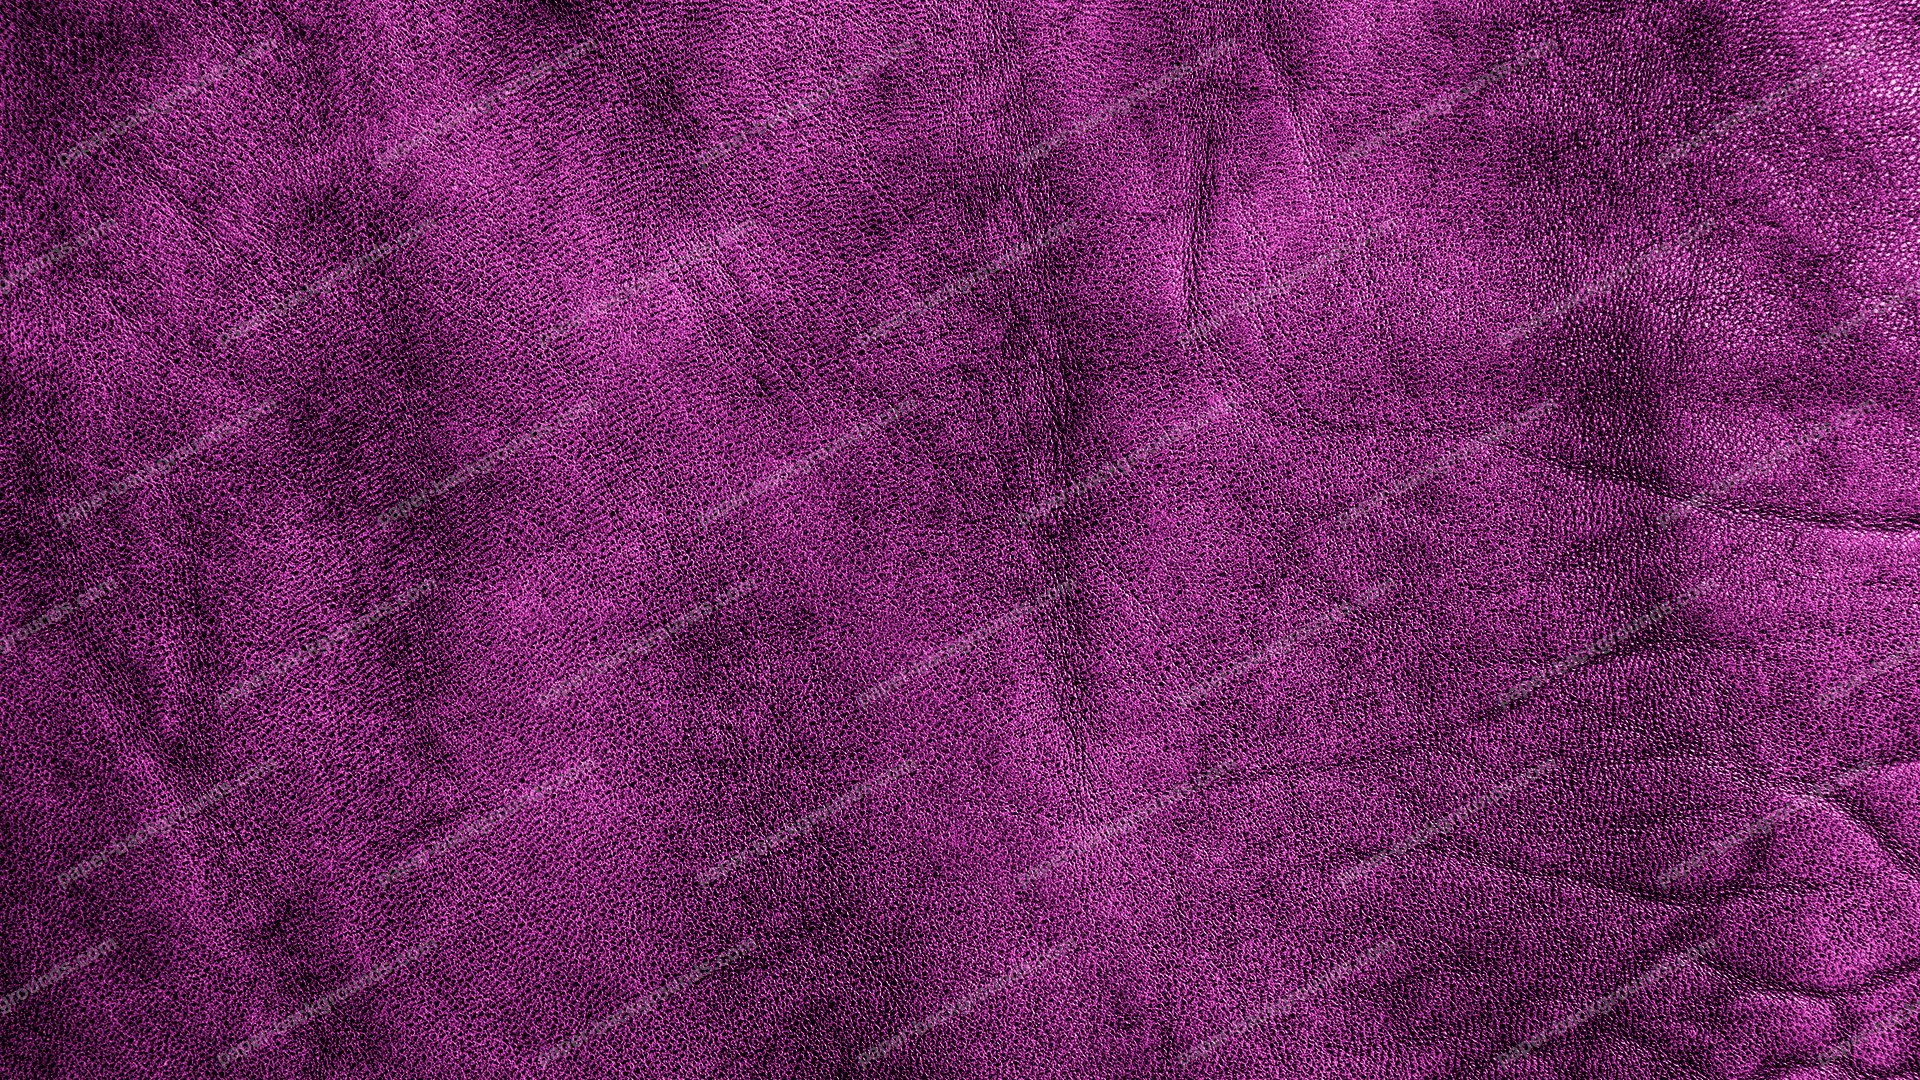 Purple Vintage Leather Background Hd 1920 X 1080p - Colorfulness - HD Wallpaper 